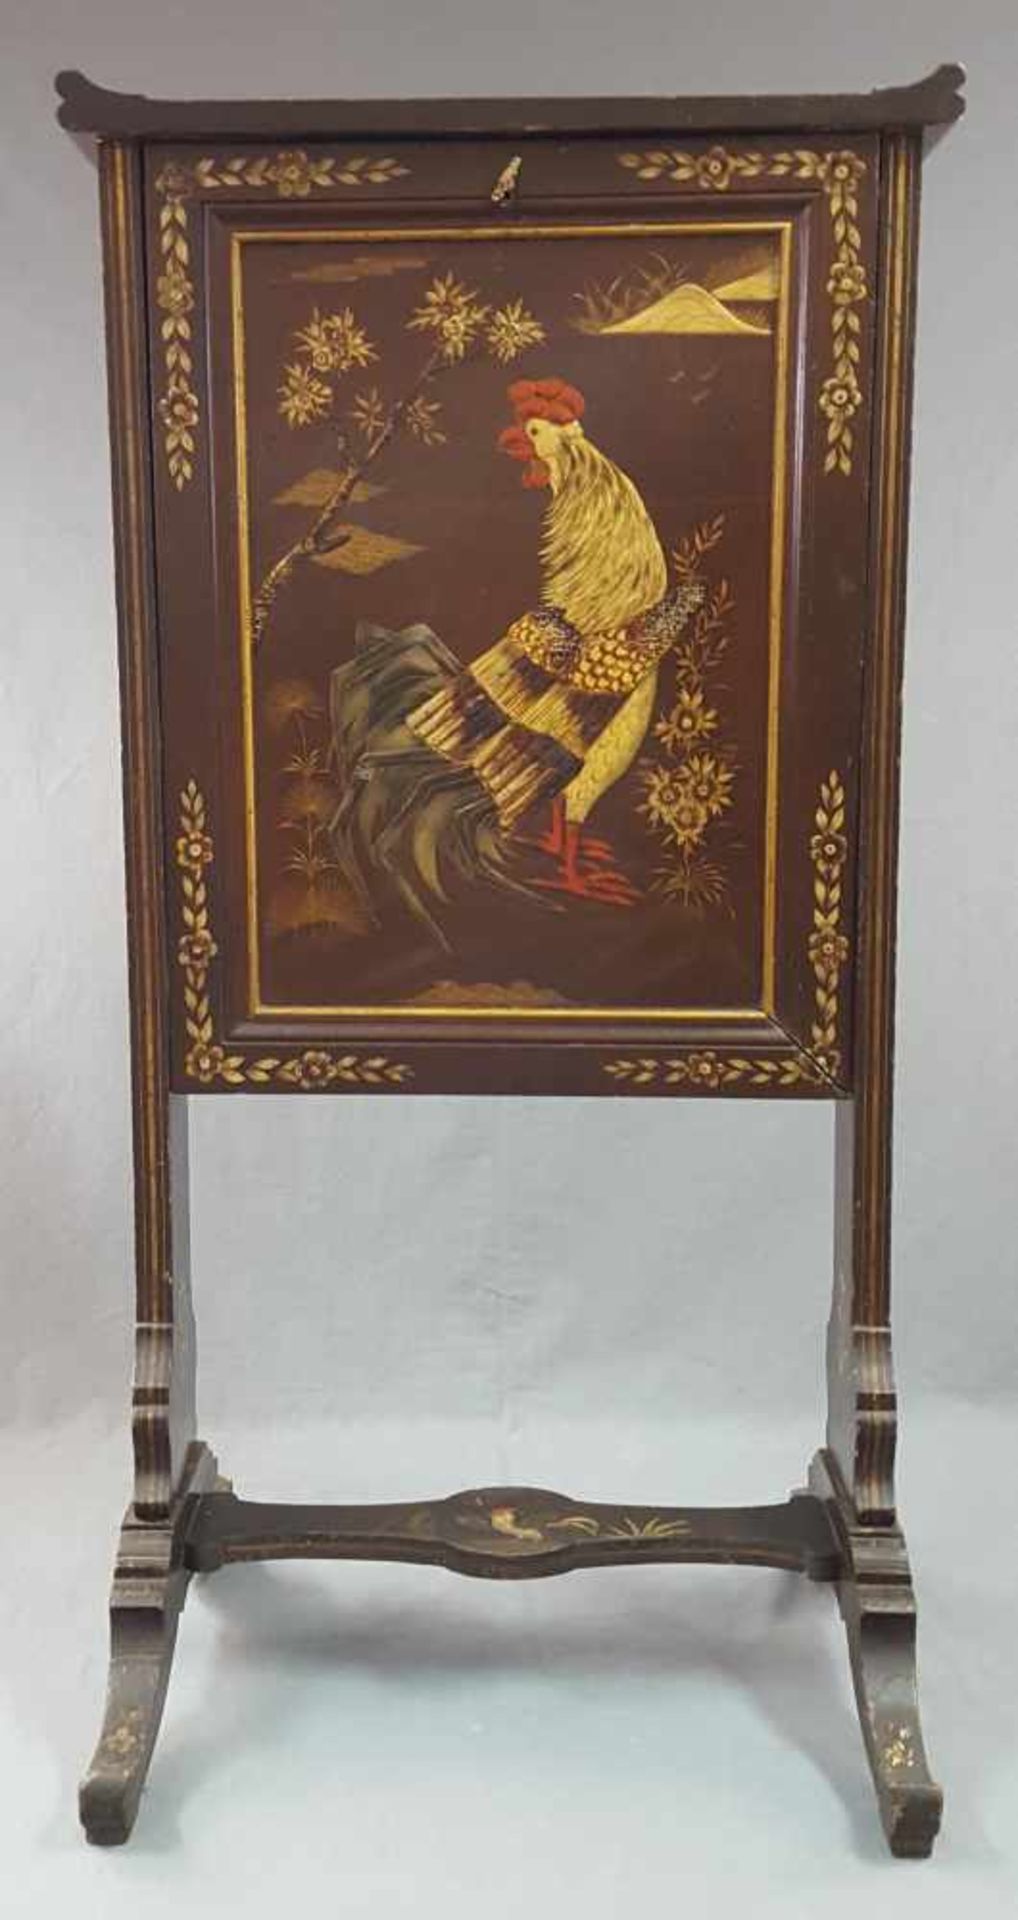 Secretary. Acquired in China before 1940. Lacquer painting.